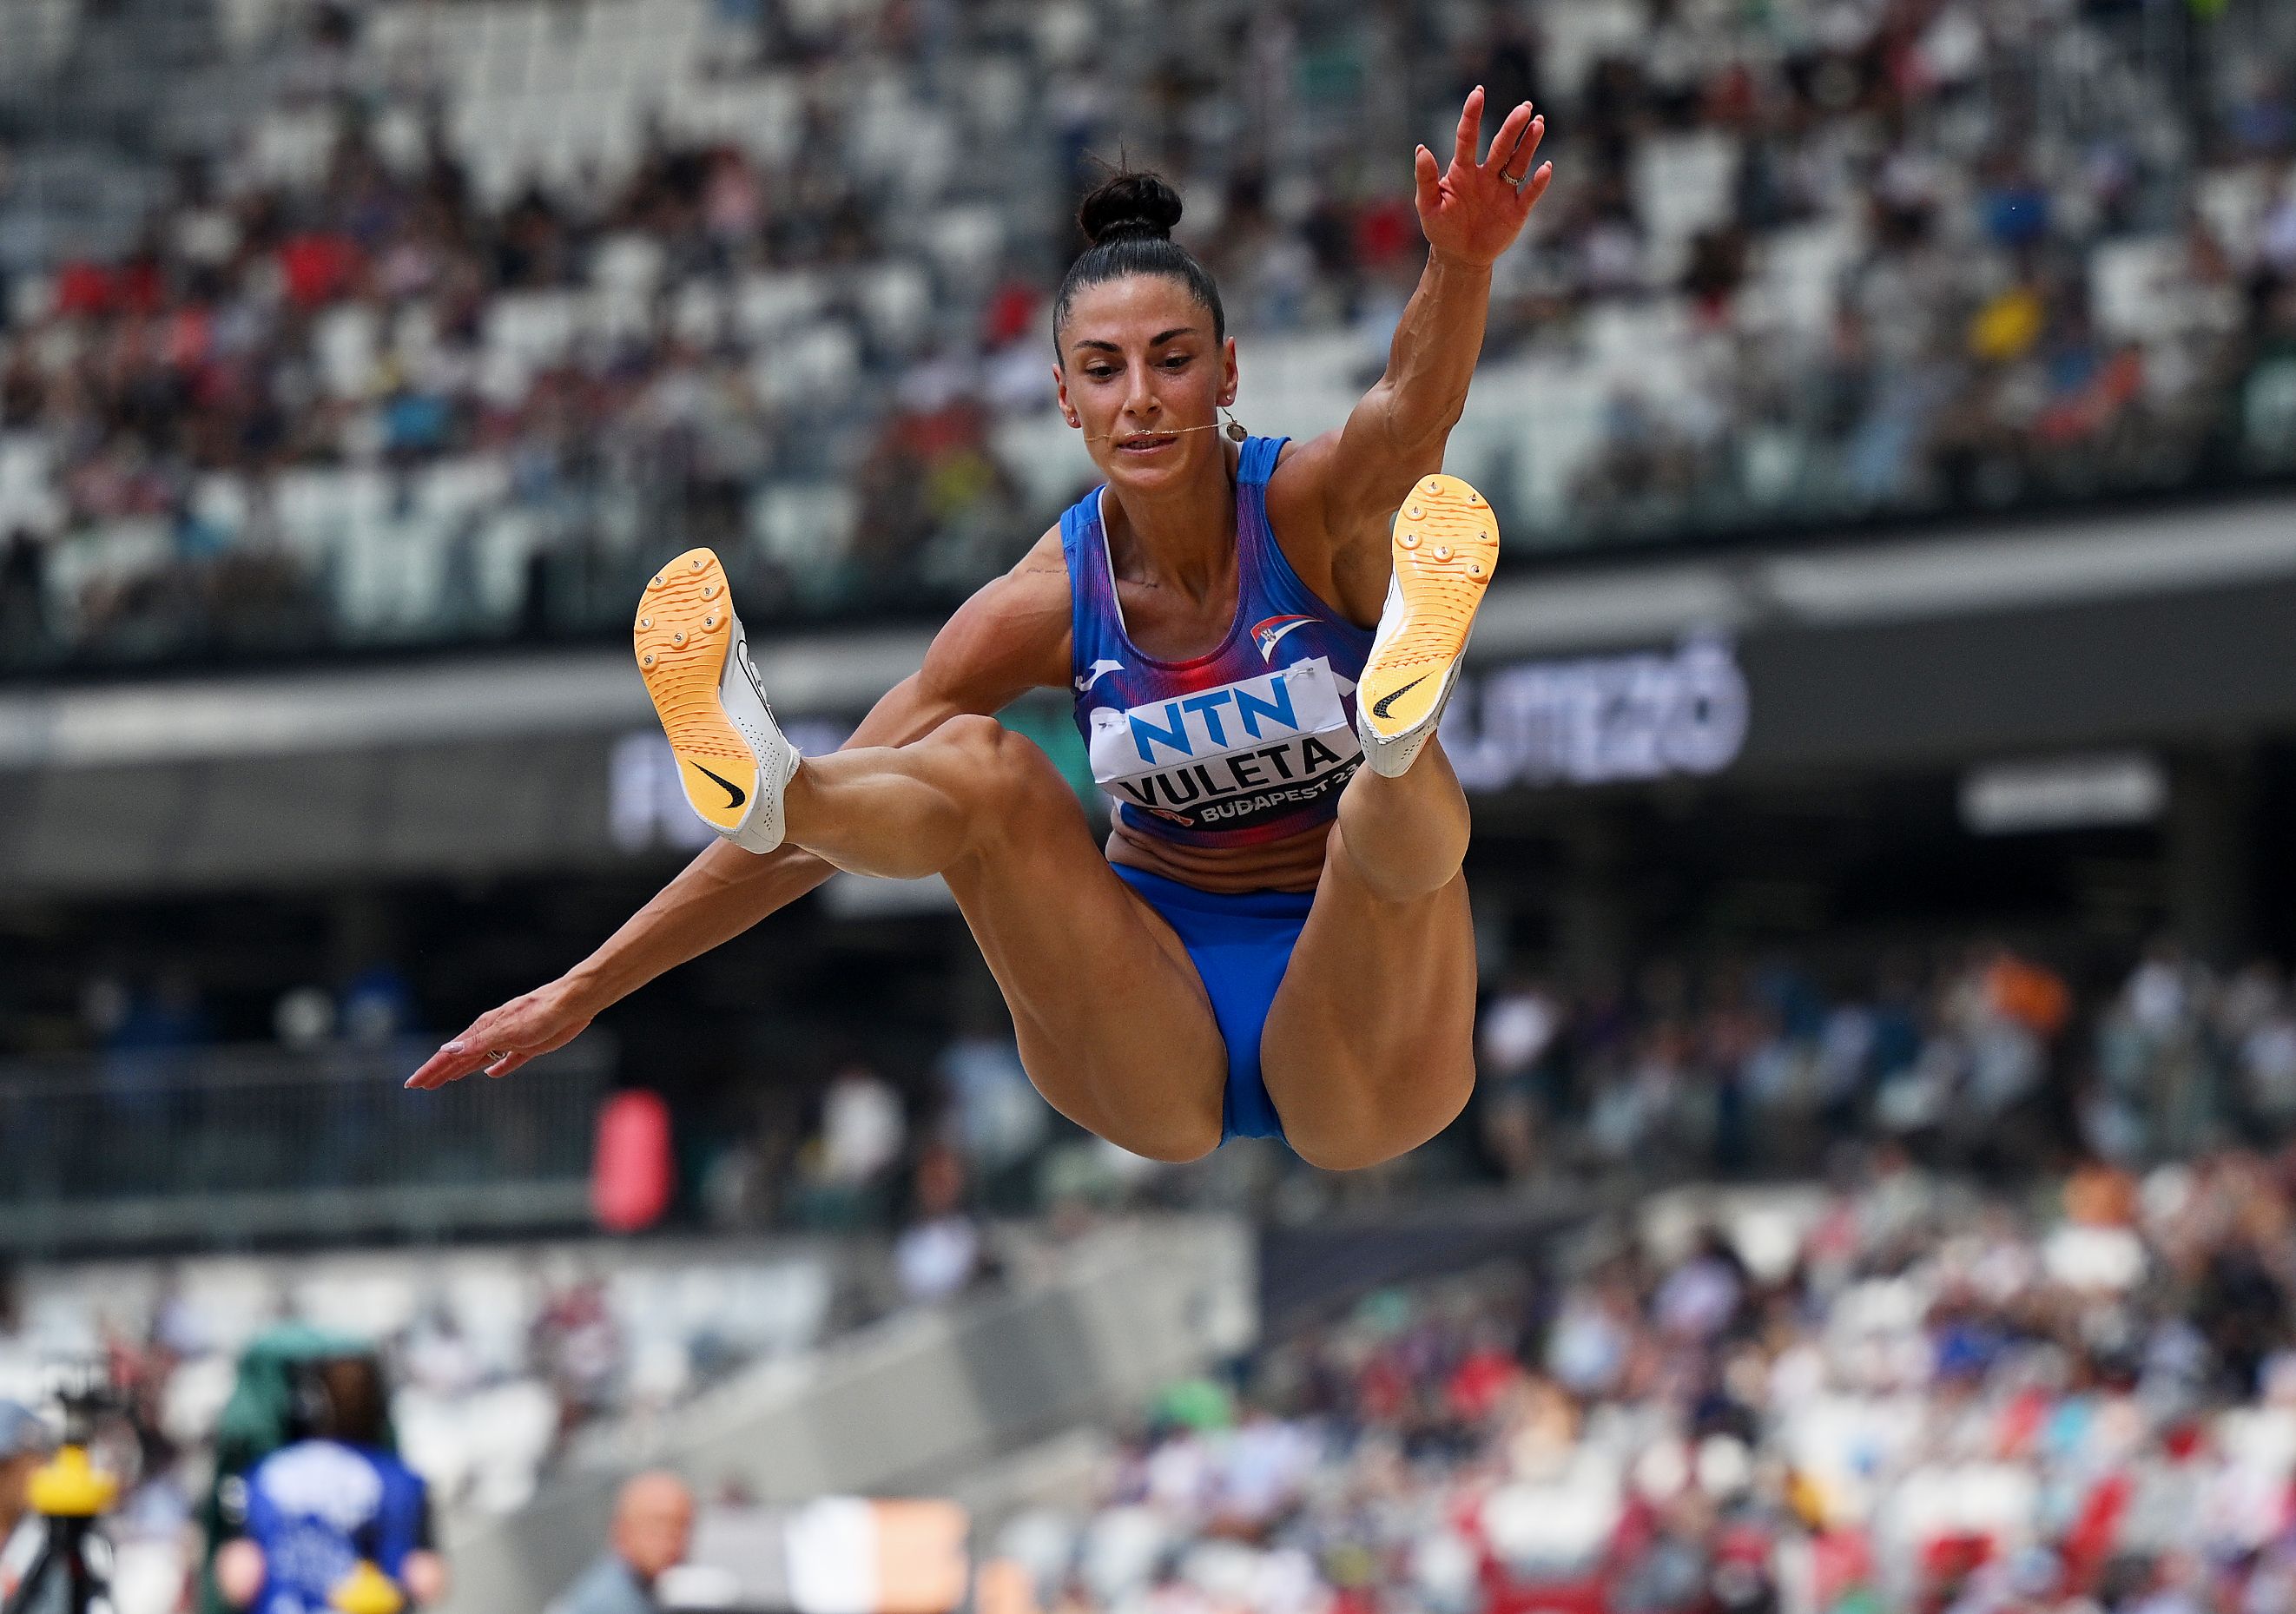 Ivana Vuleta in the long jump at the World Athletics Championships Budapest 23